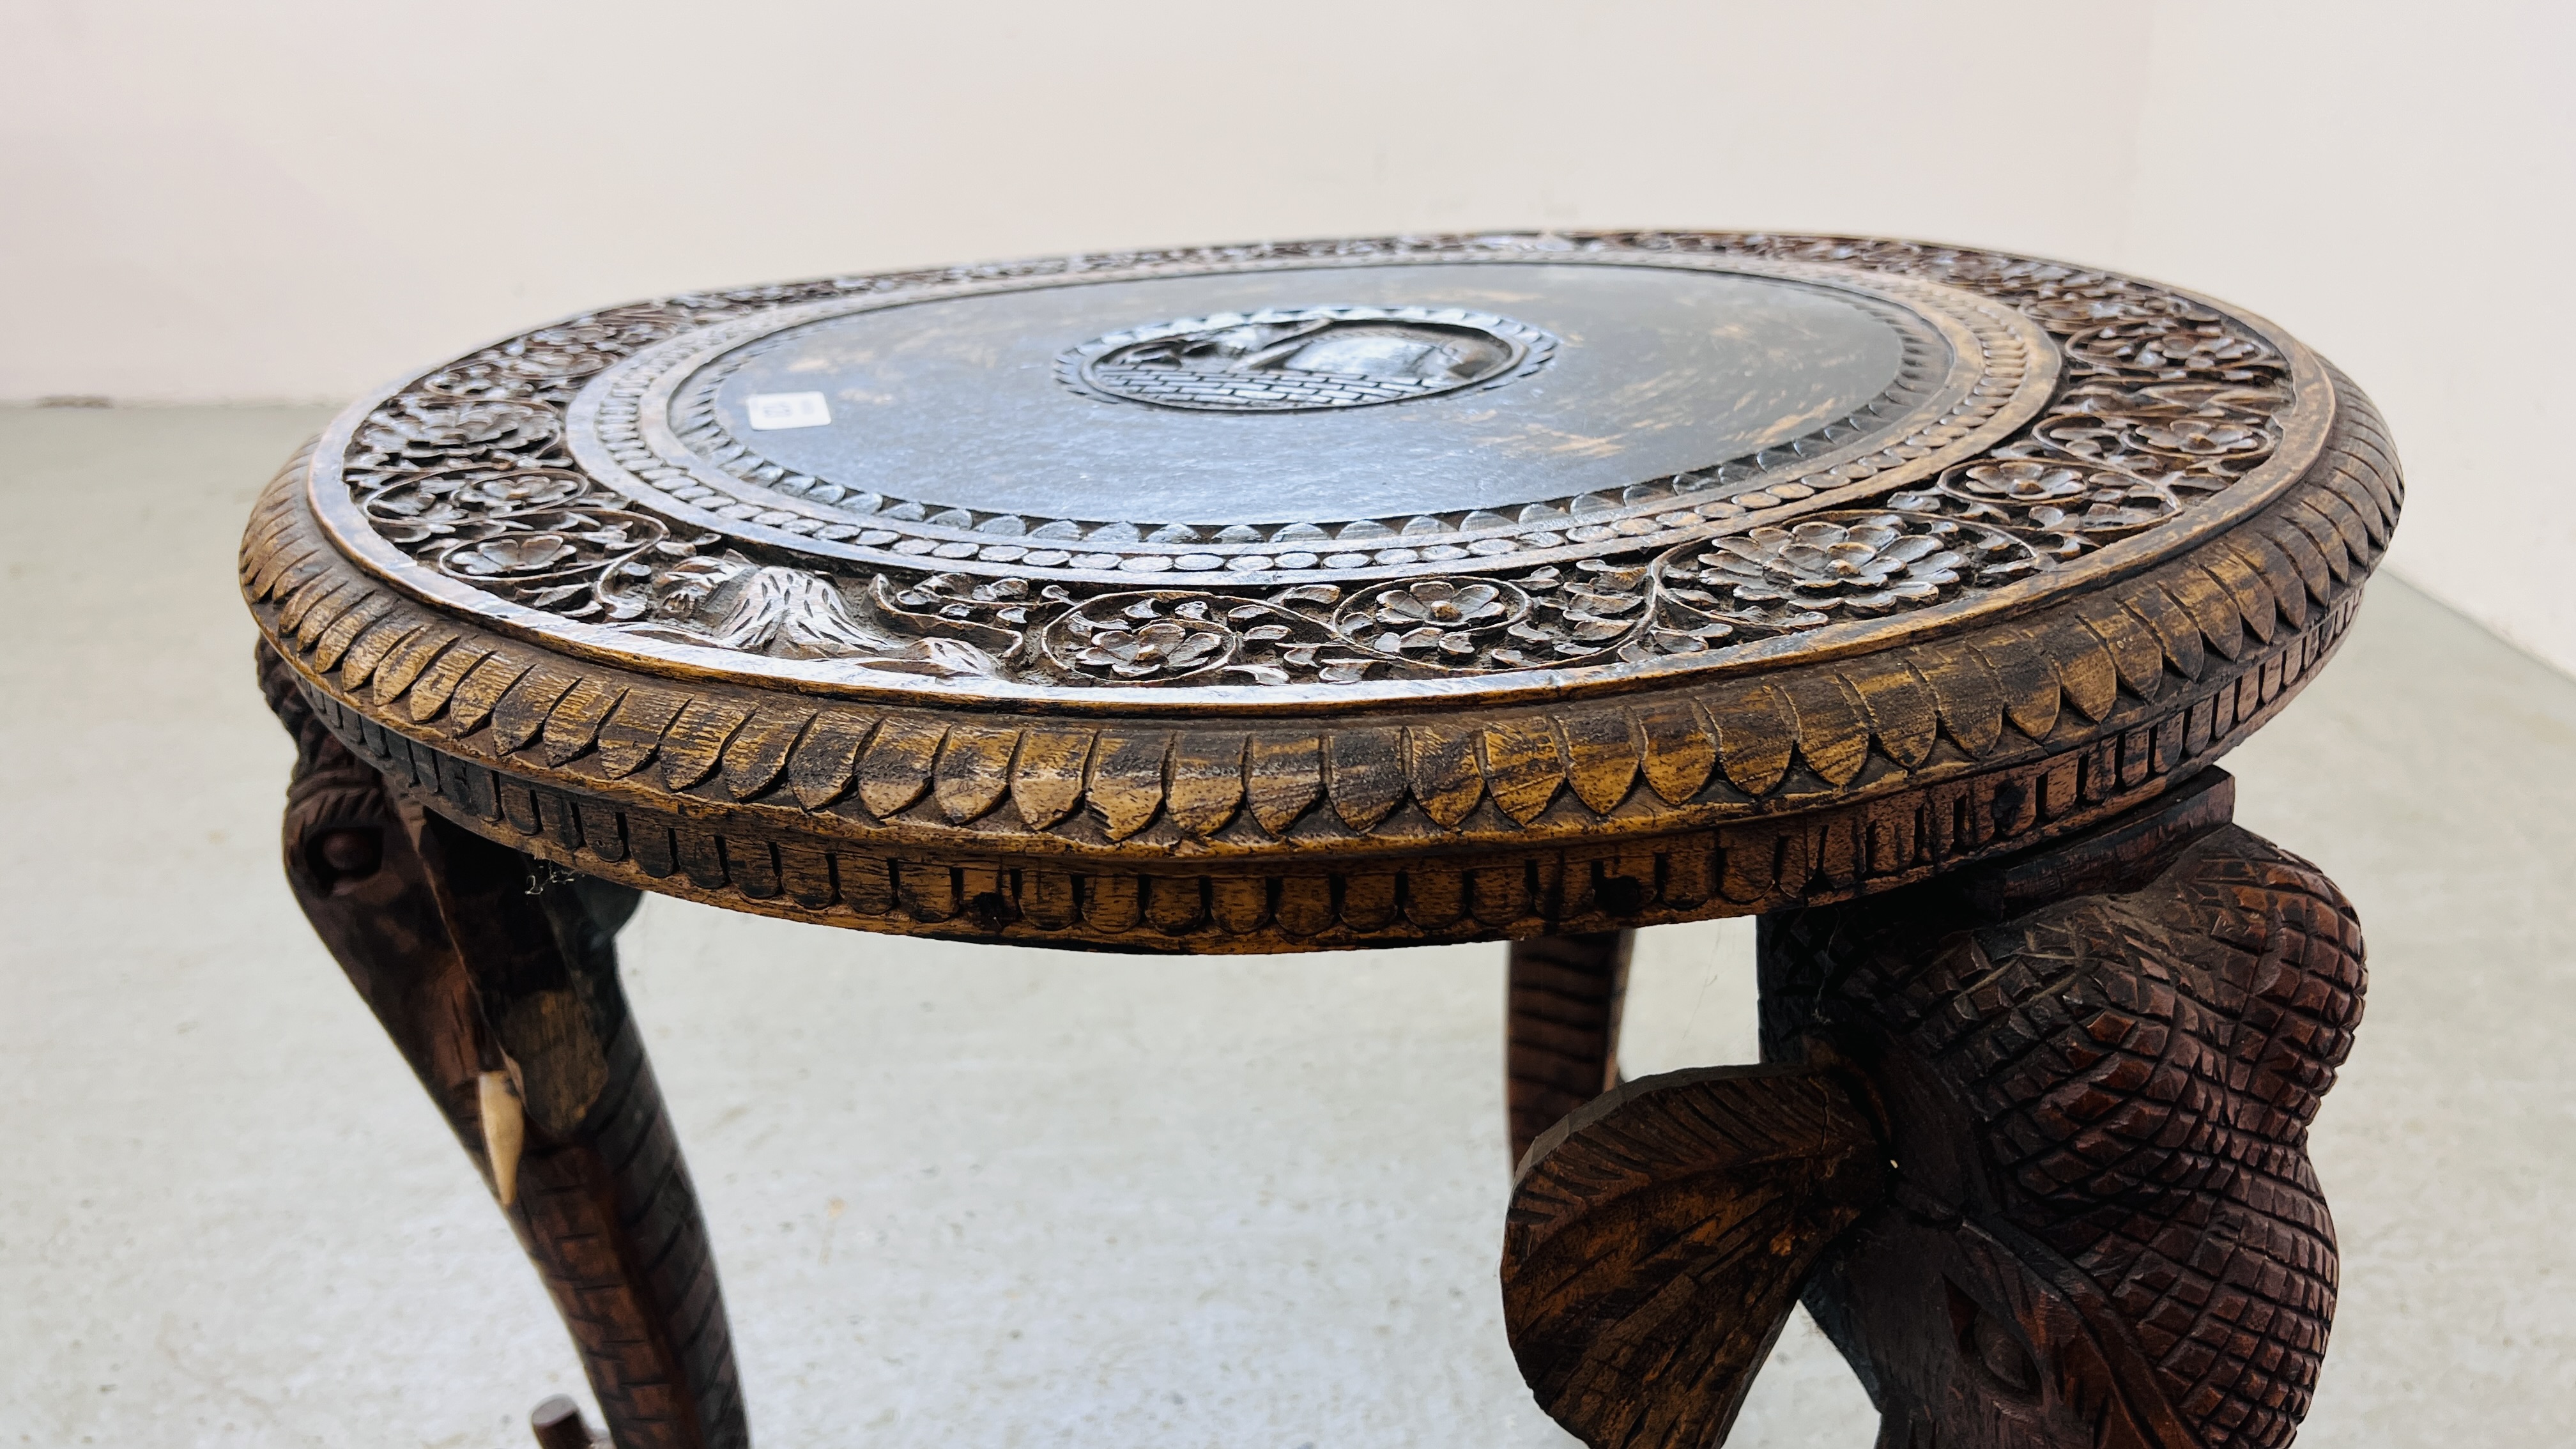 A HARDWOOD CARVED EASTERN CIRCULAR TABLE WITH ELEPHANT HEAD DETAILING TO LEGS. - Image 7 of 8